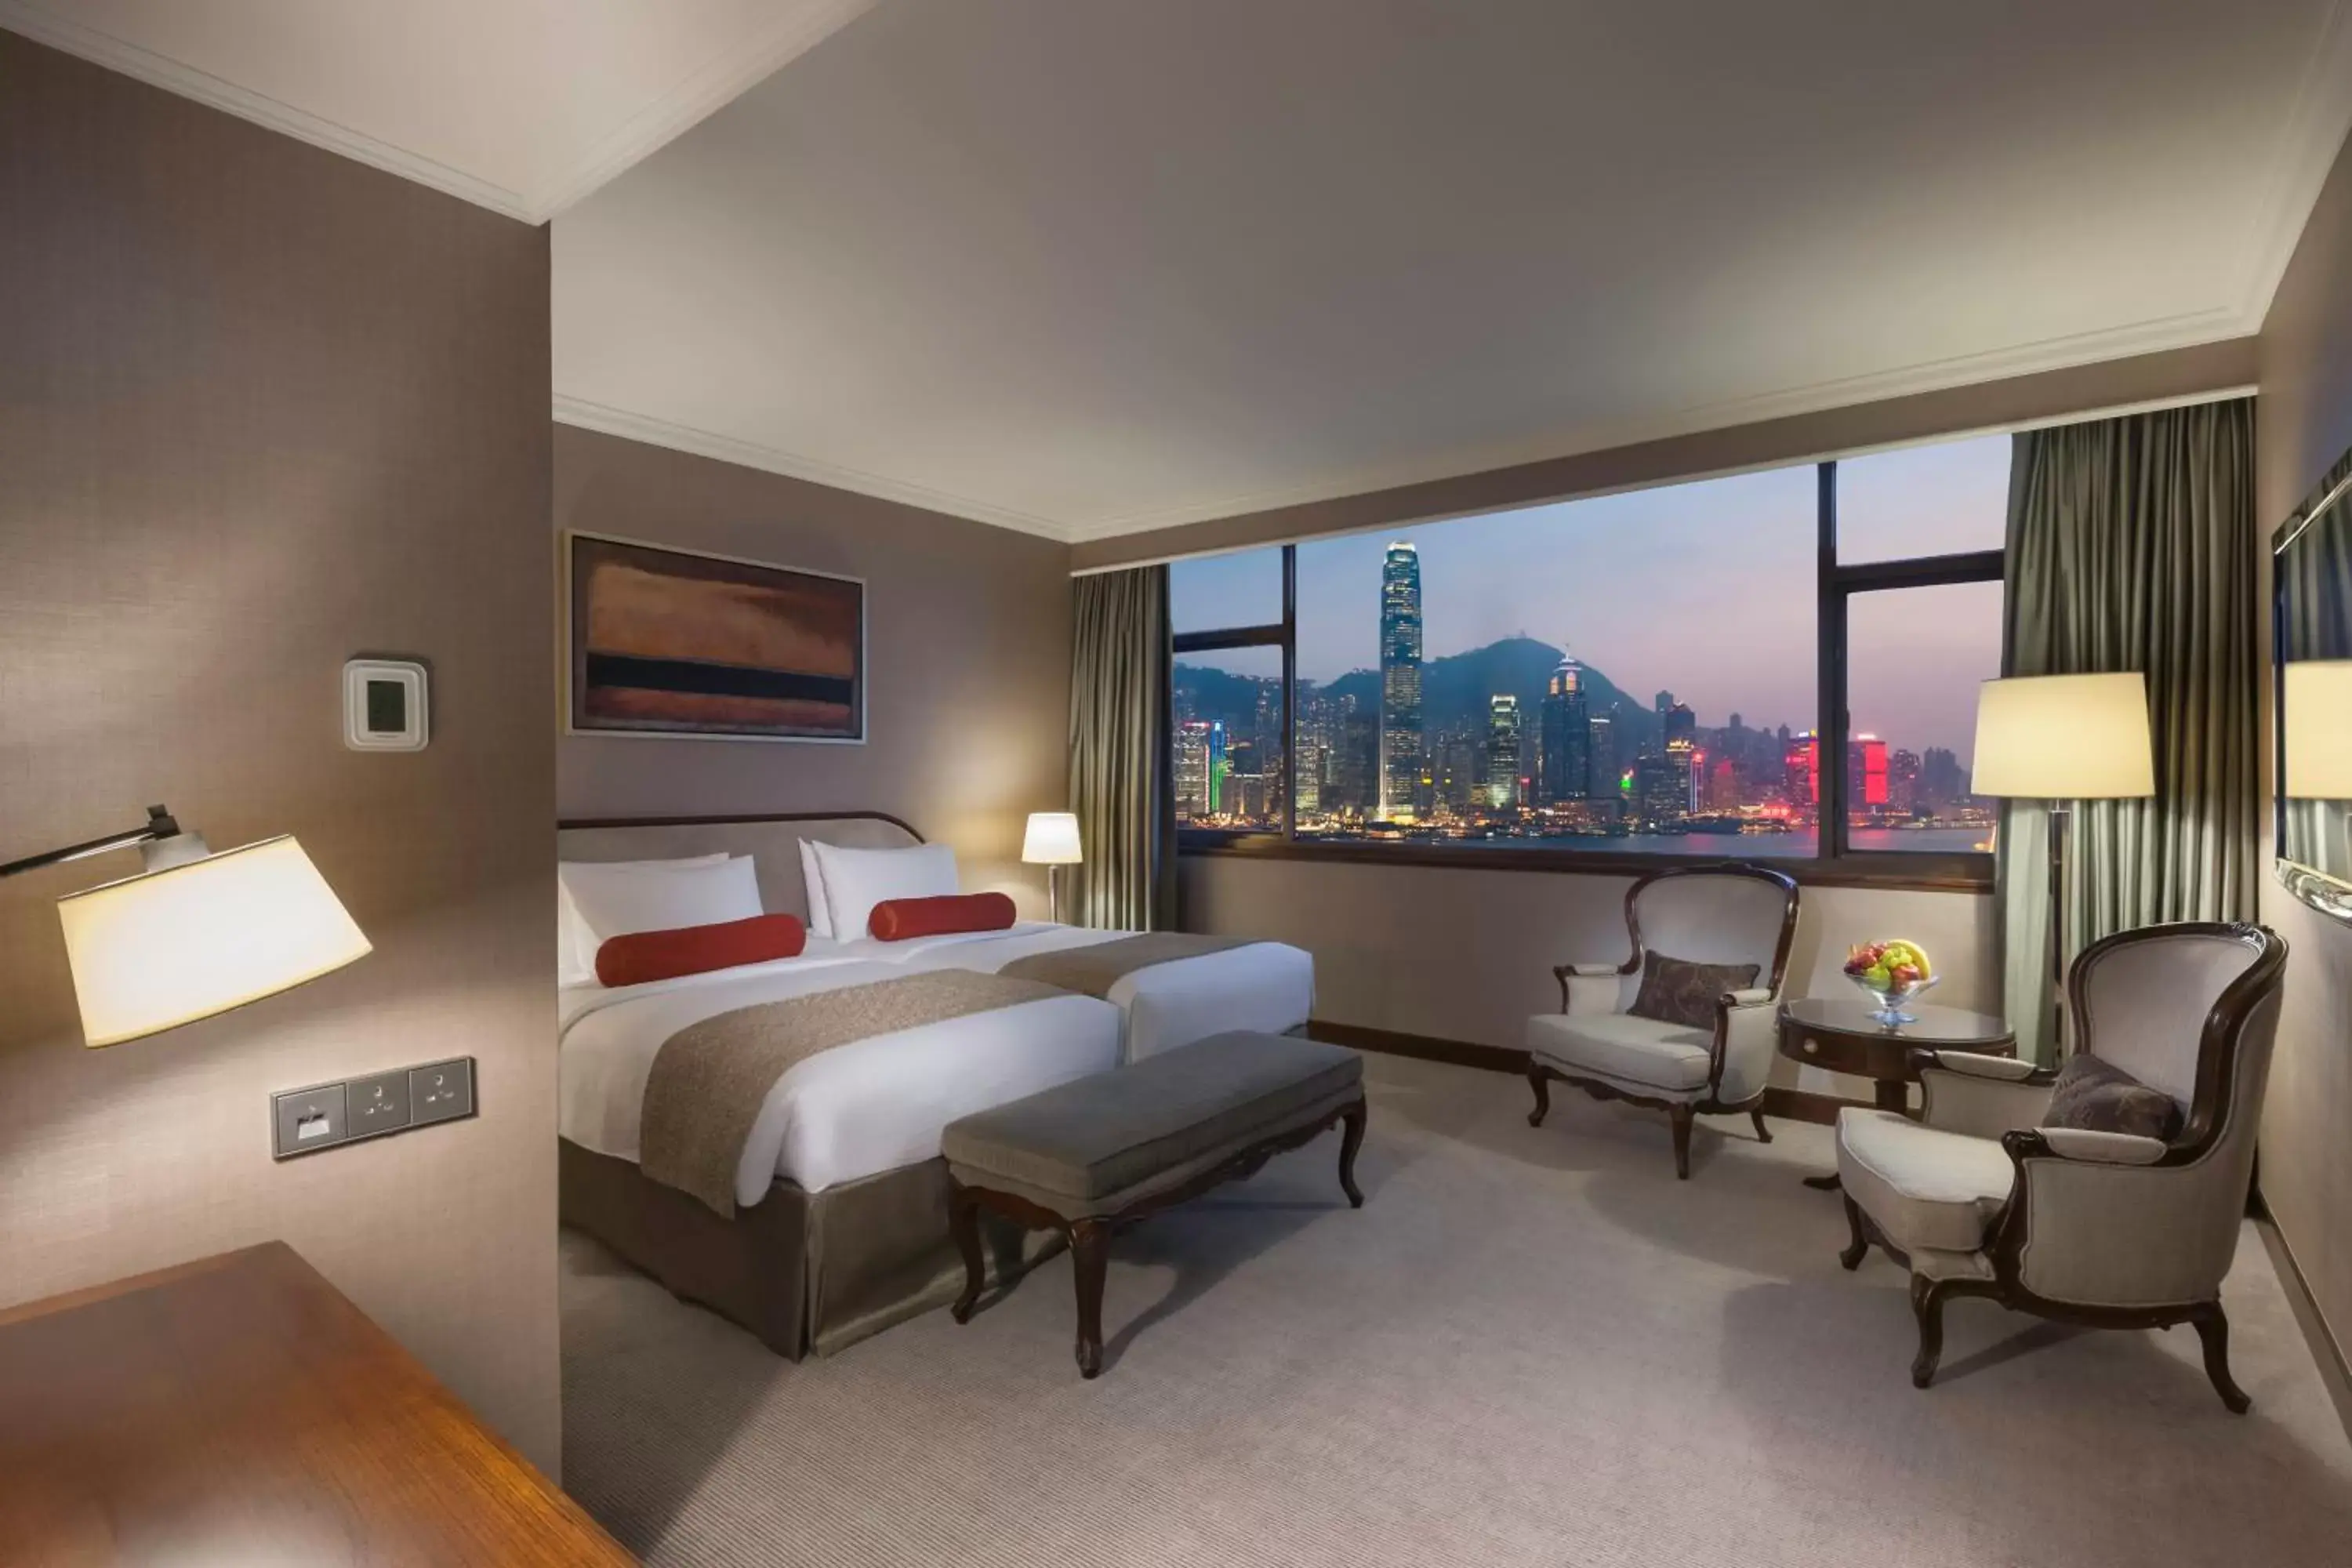 Deluxe Harbor View King or Twin Room in Marco Polo Hongkong Hotel